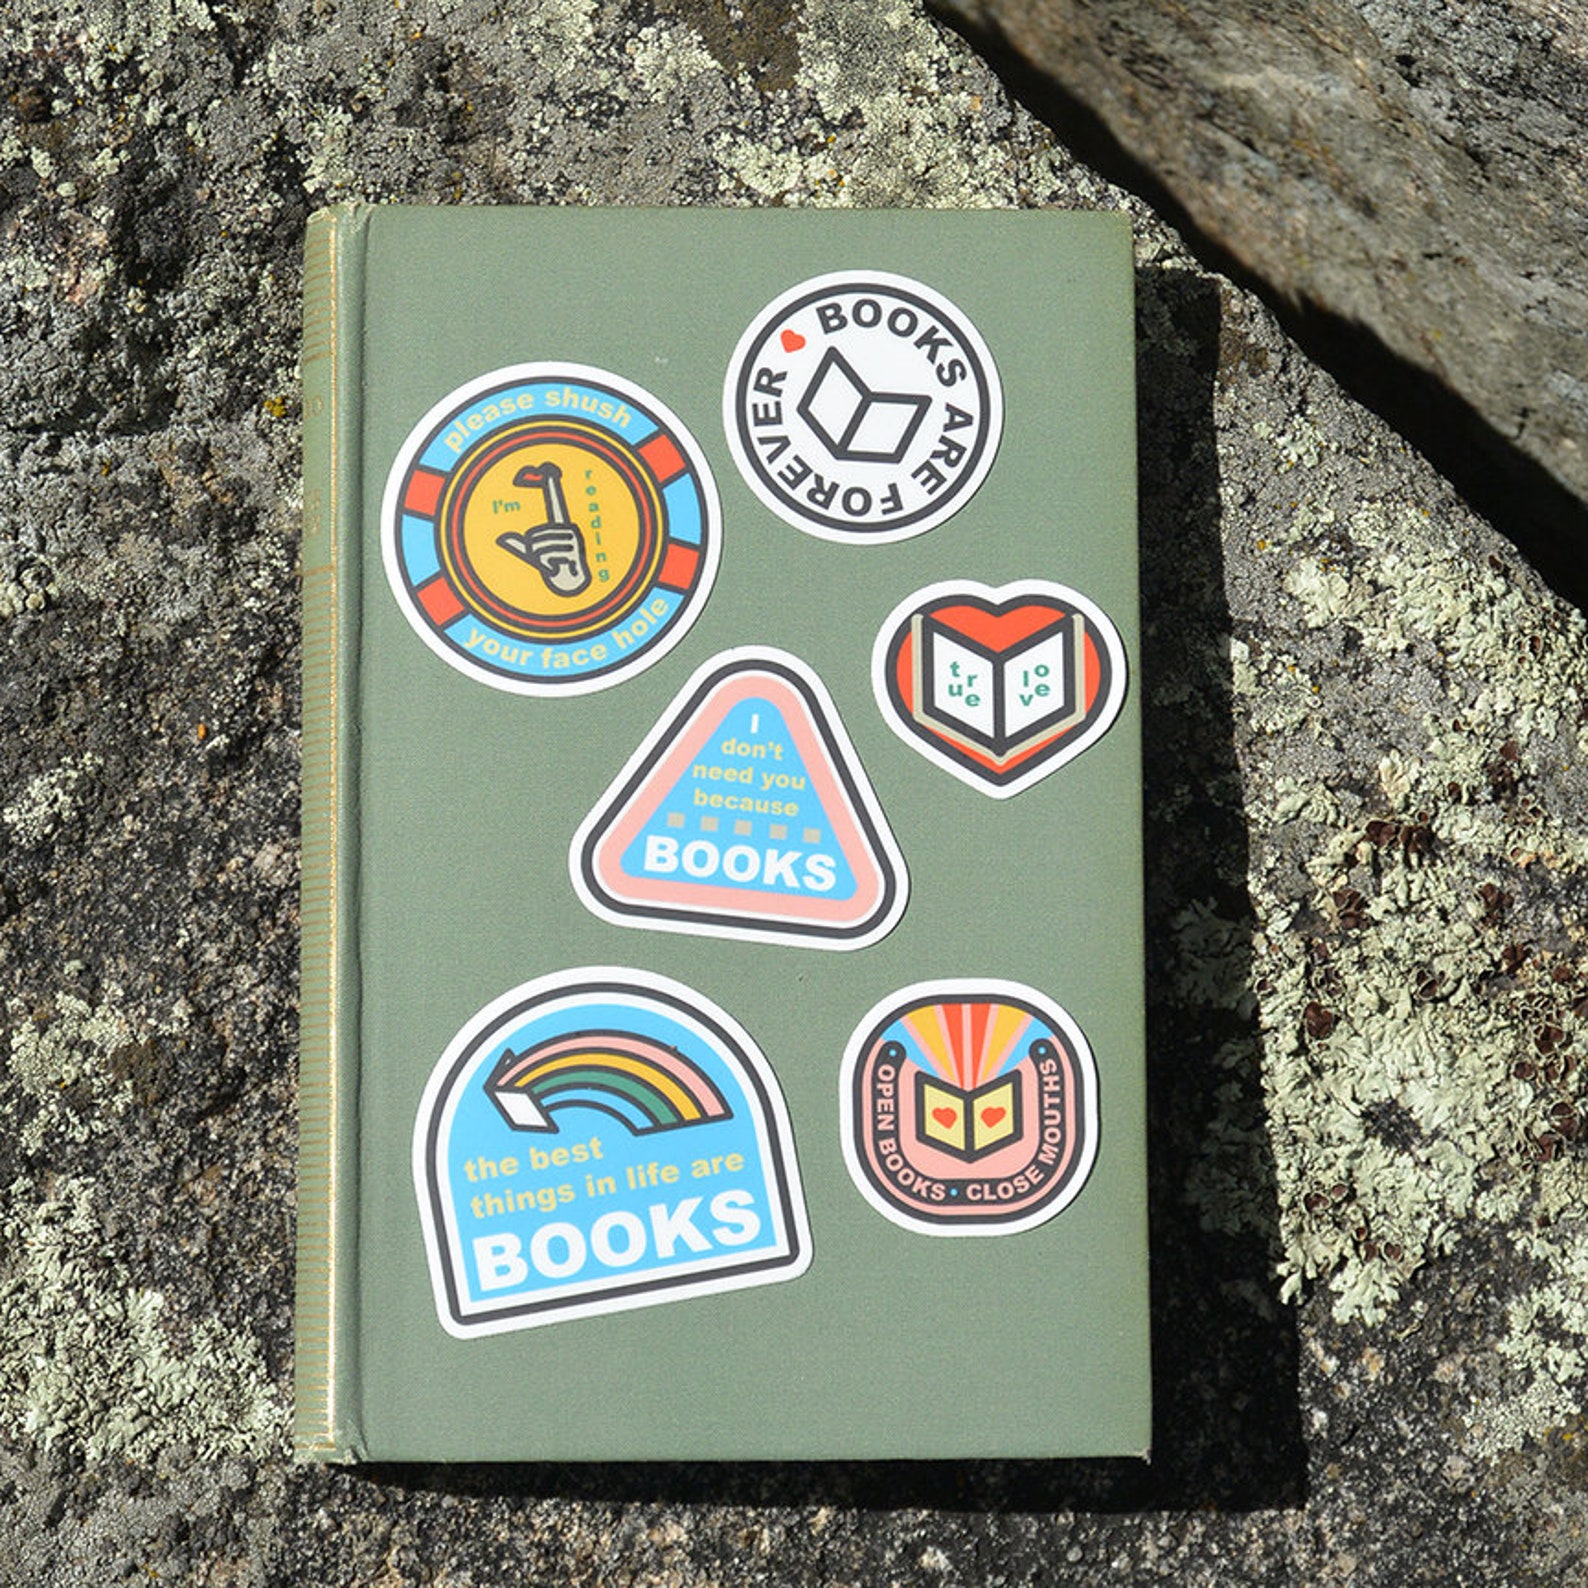 Six vintage-style book stickers on a green hardback book. The book is on concrete. 